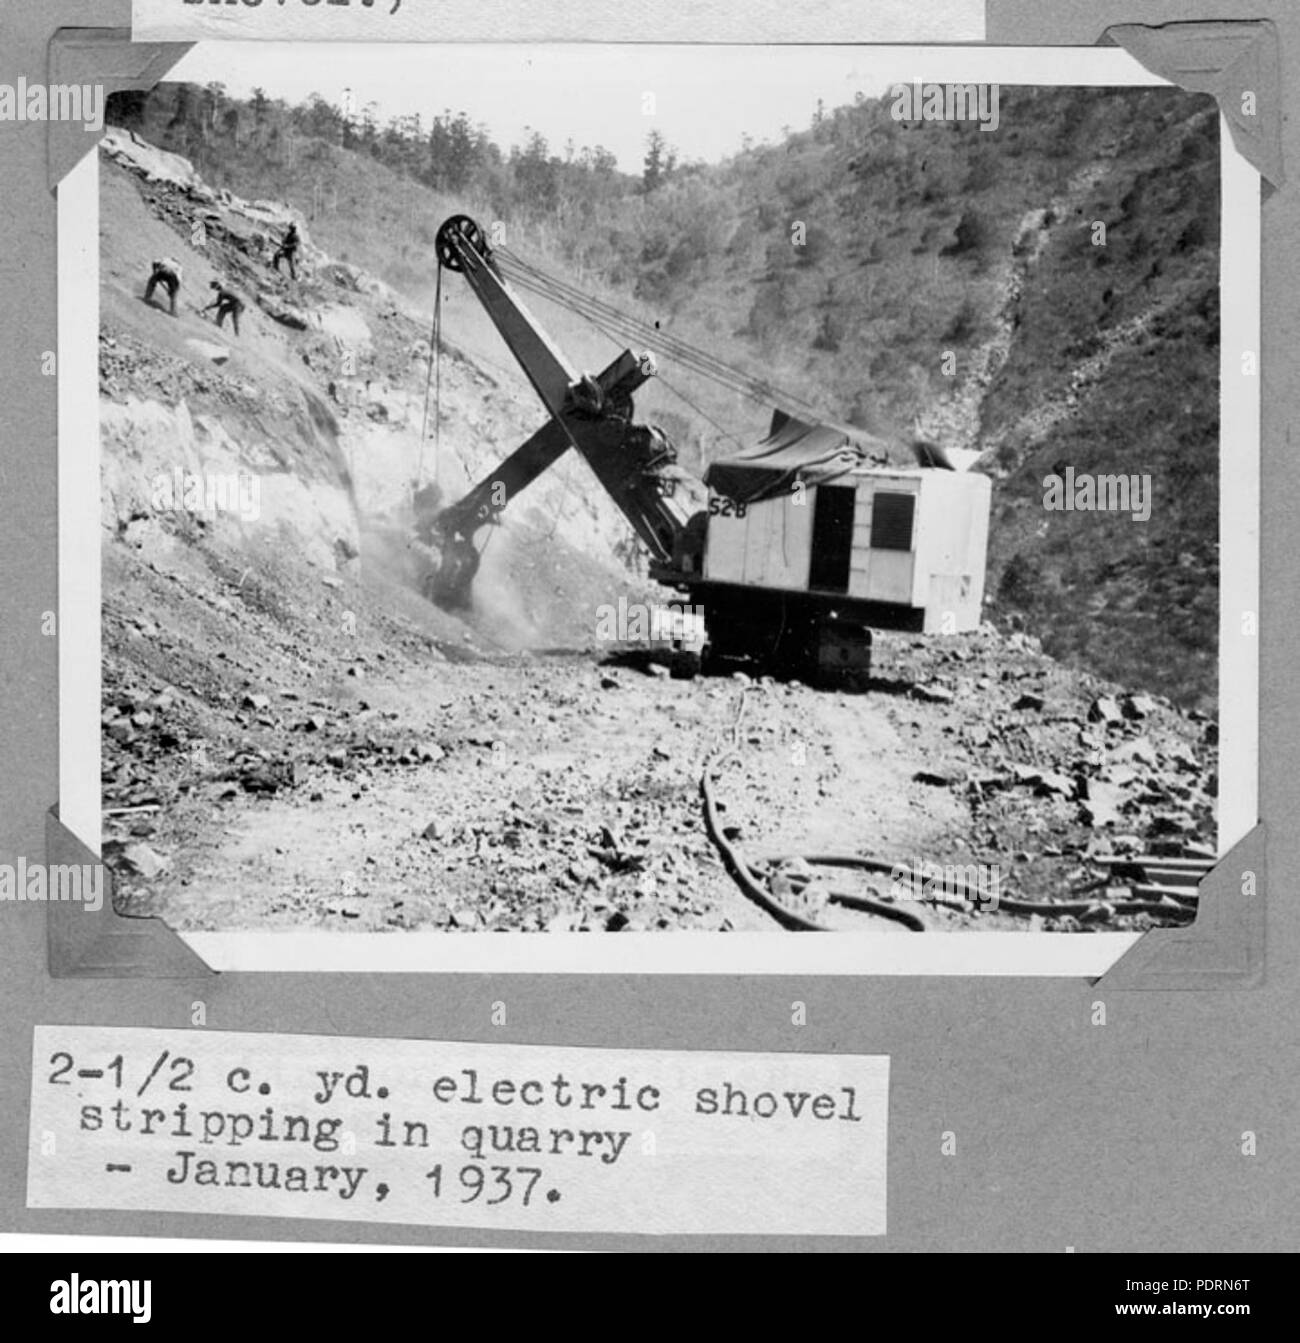 And the steam shovel фото 95